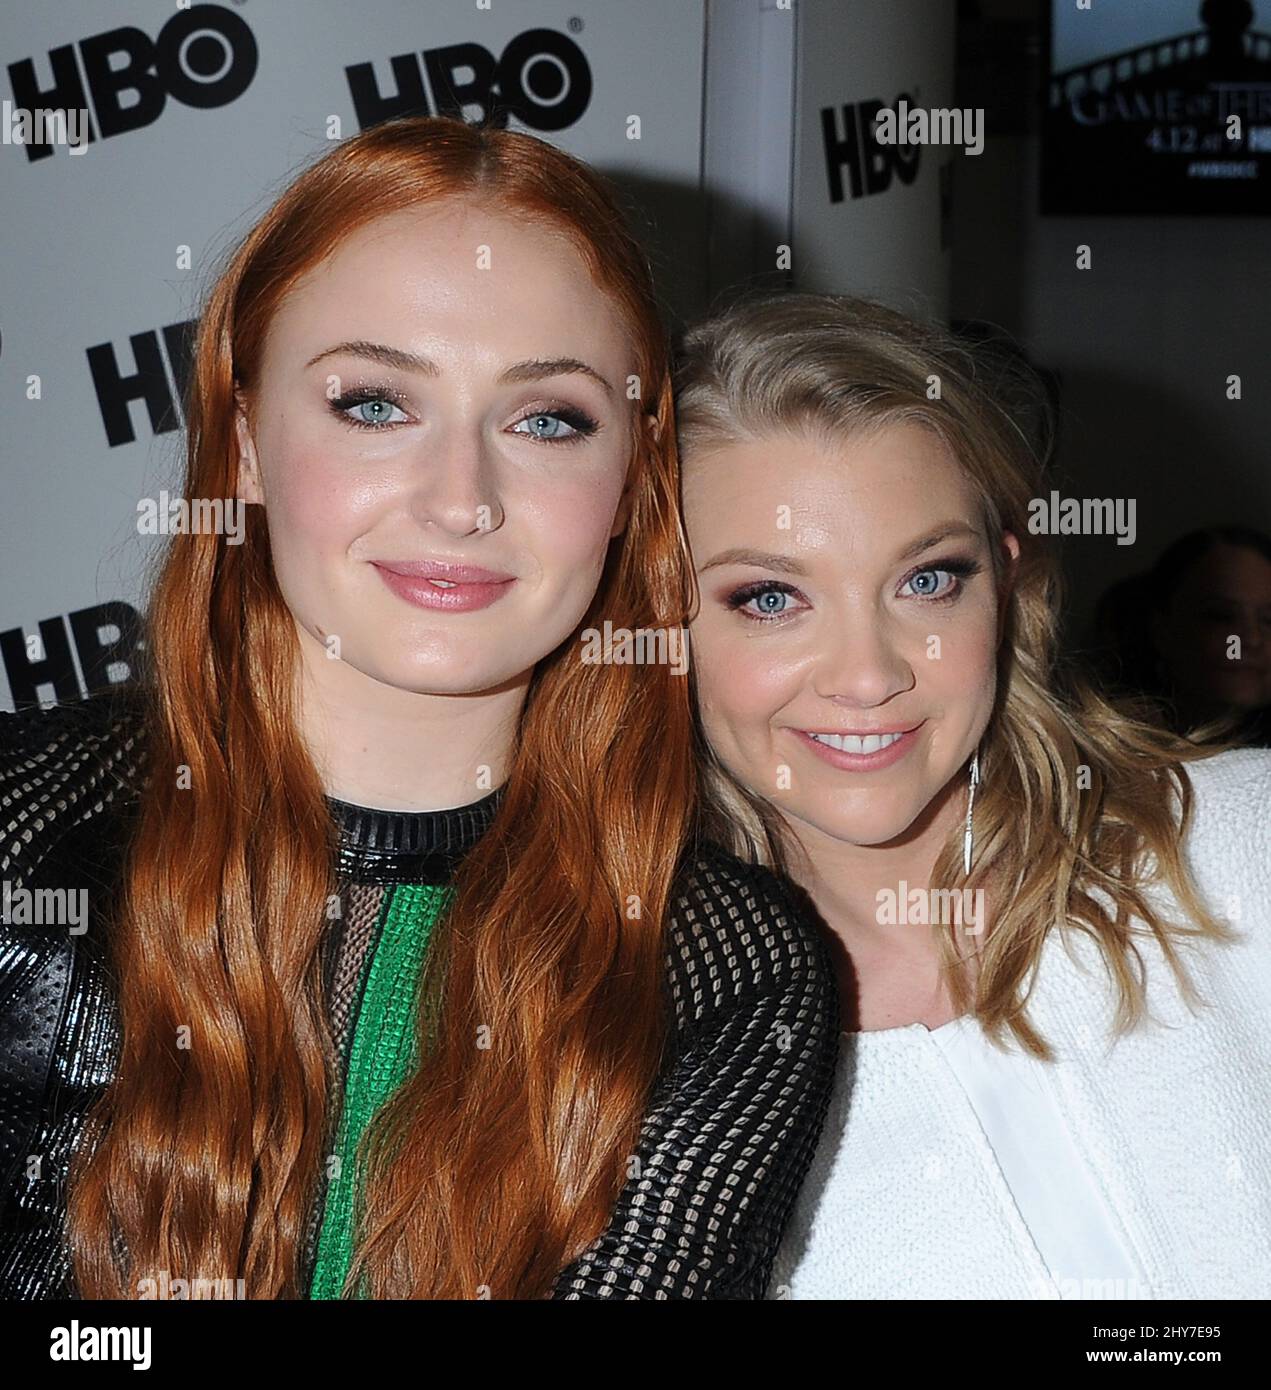 Sophie Turner and Natalie Dormer attending 'Game of Thrones' autograph signing booth at Comic-Con 2015 held at the San Diego Convention Center in San Diego, USA. Stock Photo